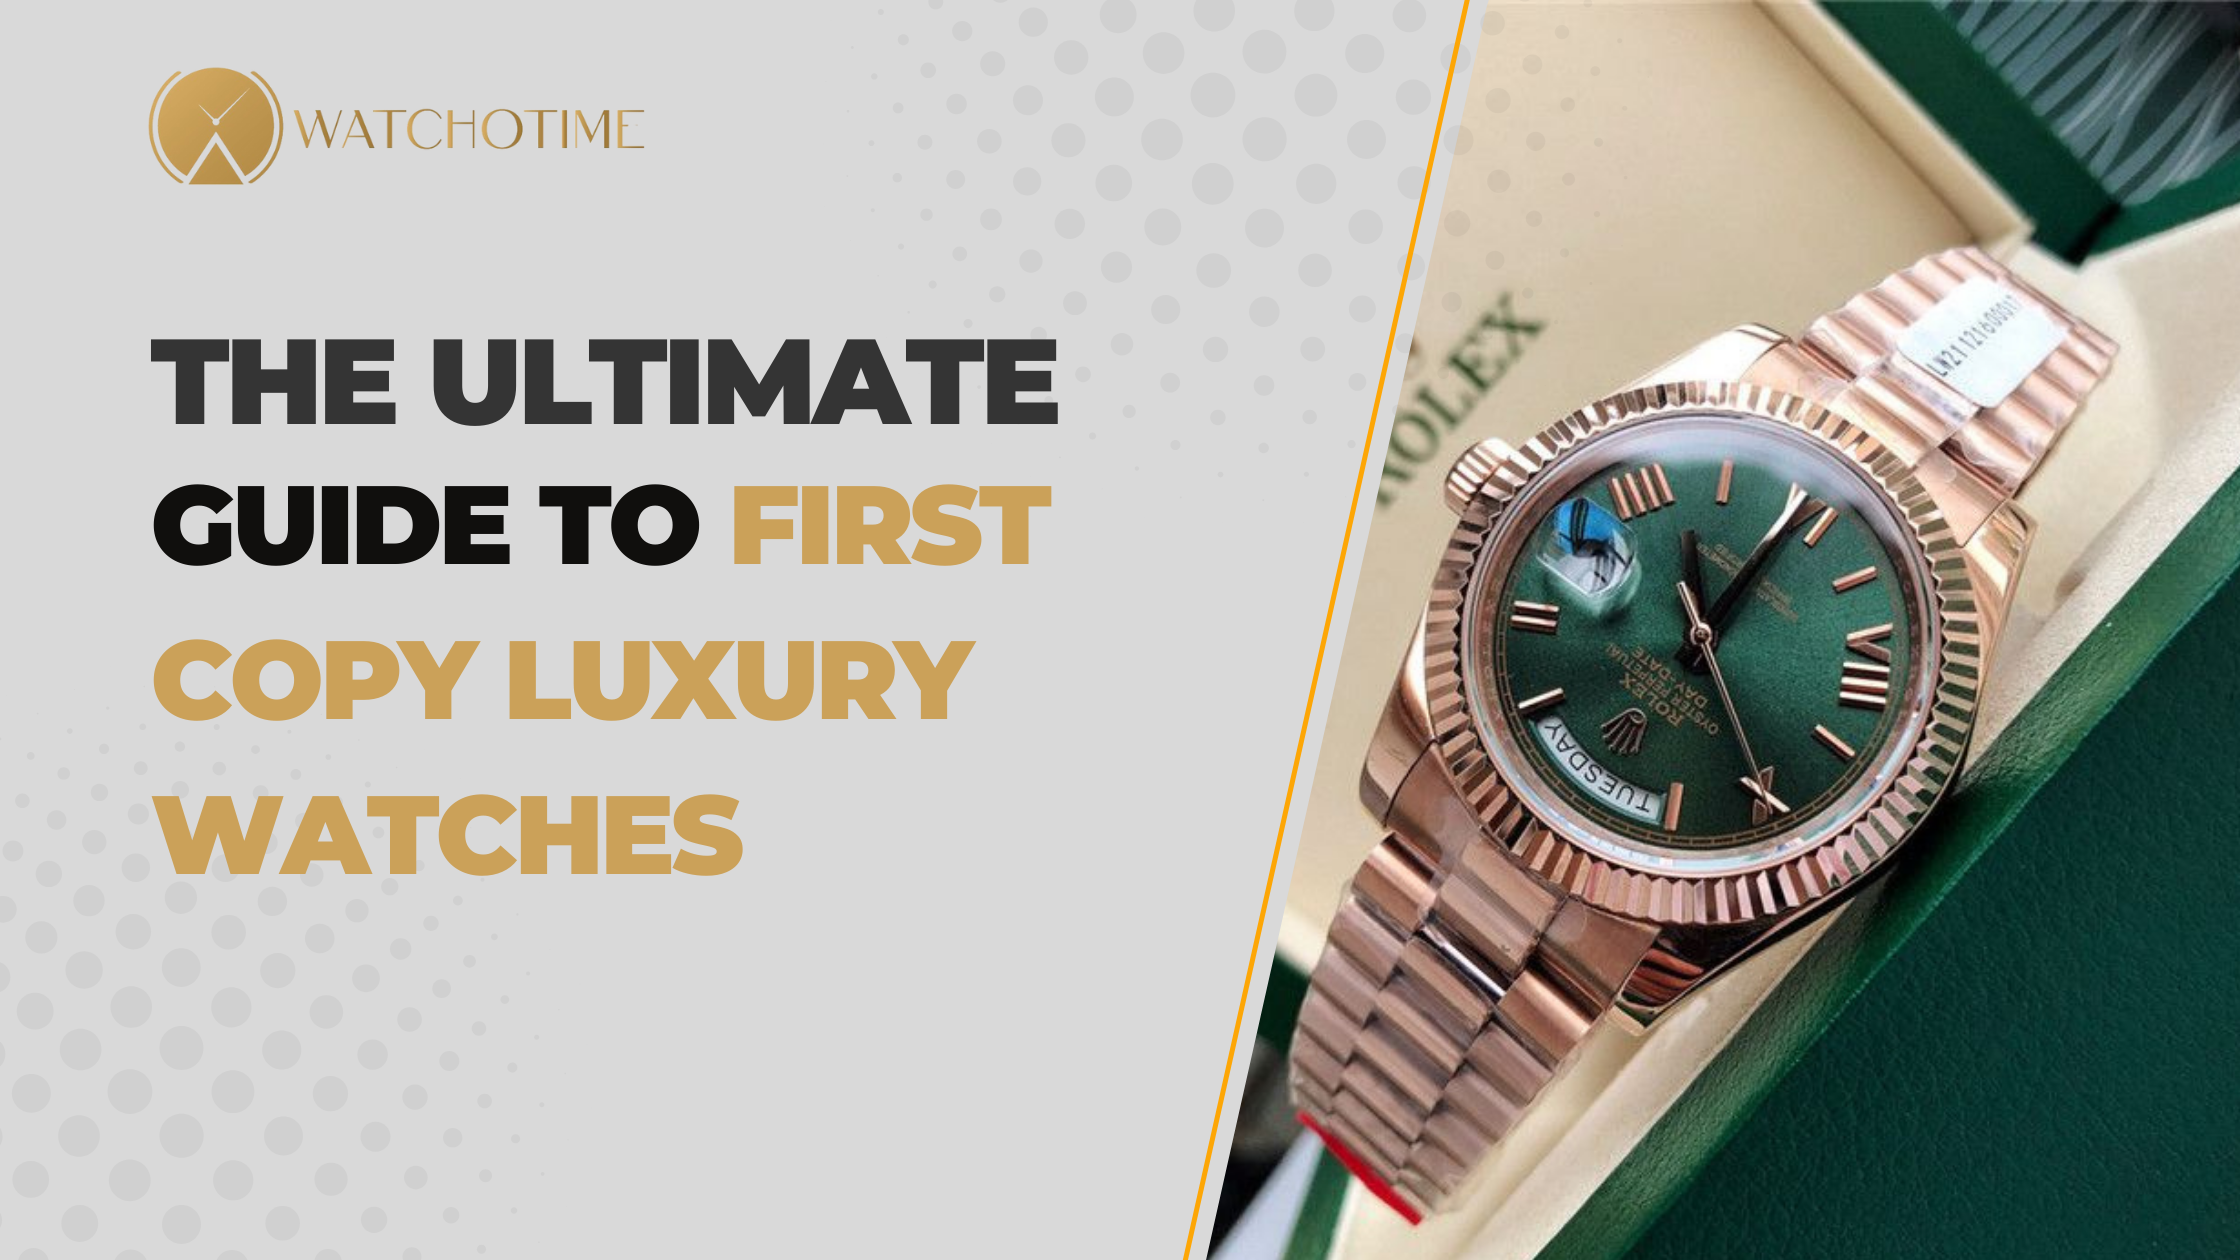 The Ultimate Guide to First Copy Luxury Watches- Discover Elegance with Watchotime